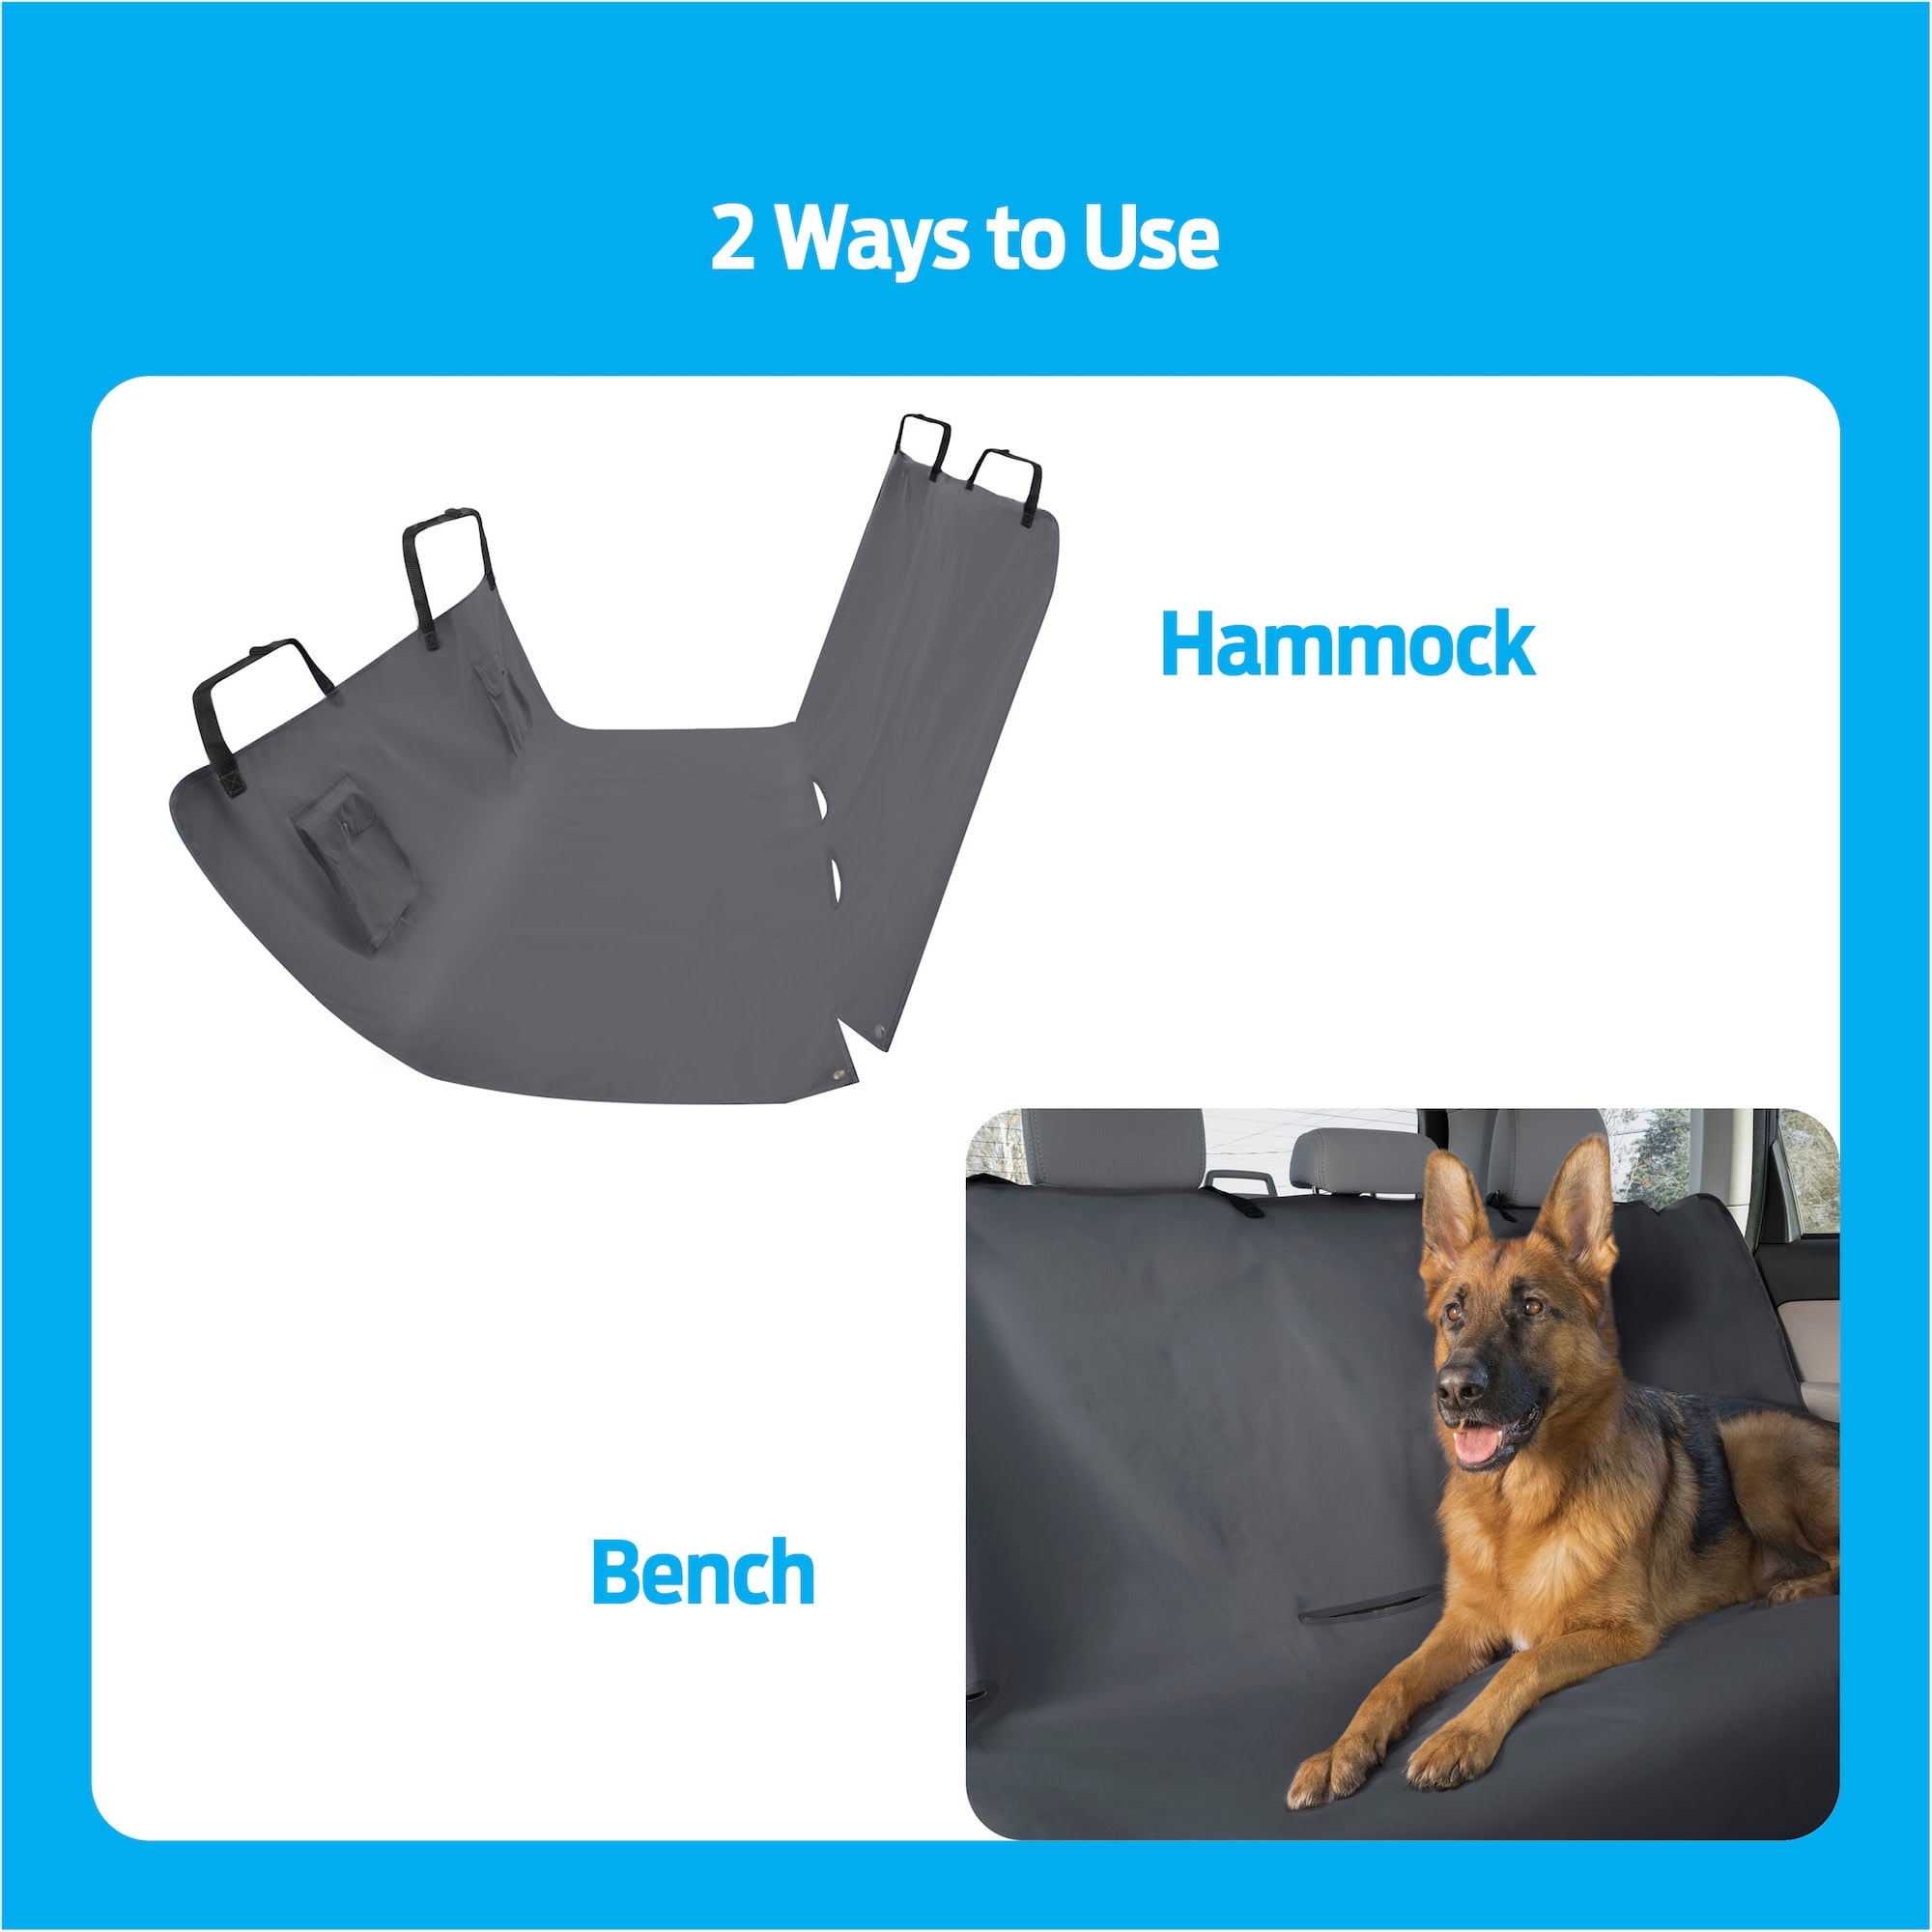 Premier Pet Car Hammock Seat Cover - Helps Secure Your Dog and Protect  Vehicle's Back Seat - Durable and Machine Washable Design Makes Clean Up  Easy - Walmart.com